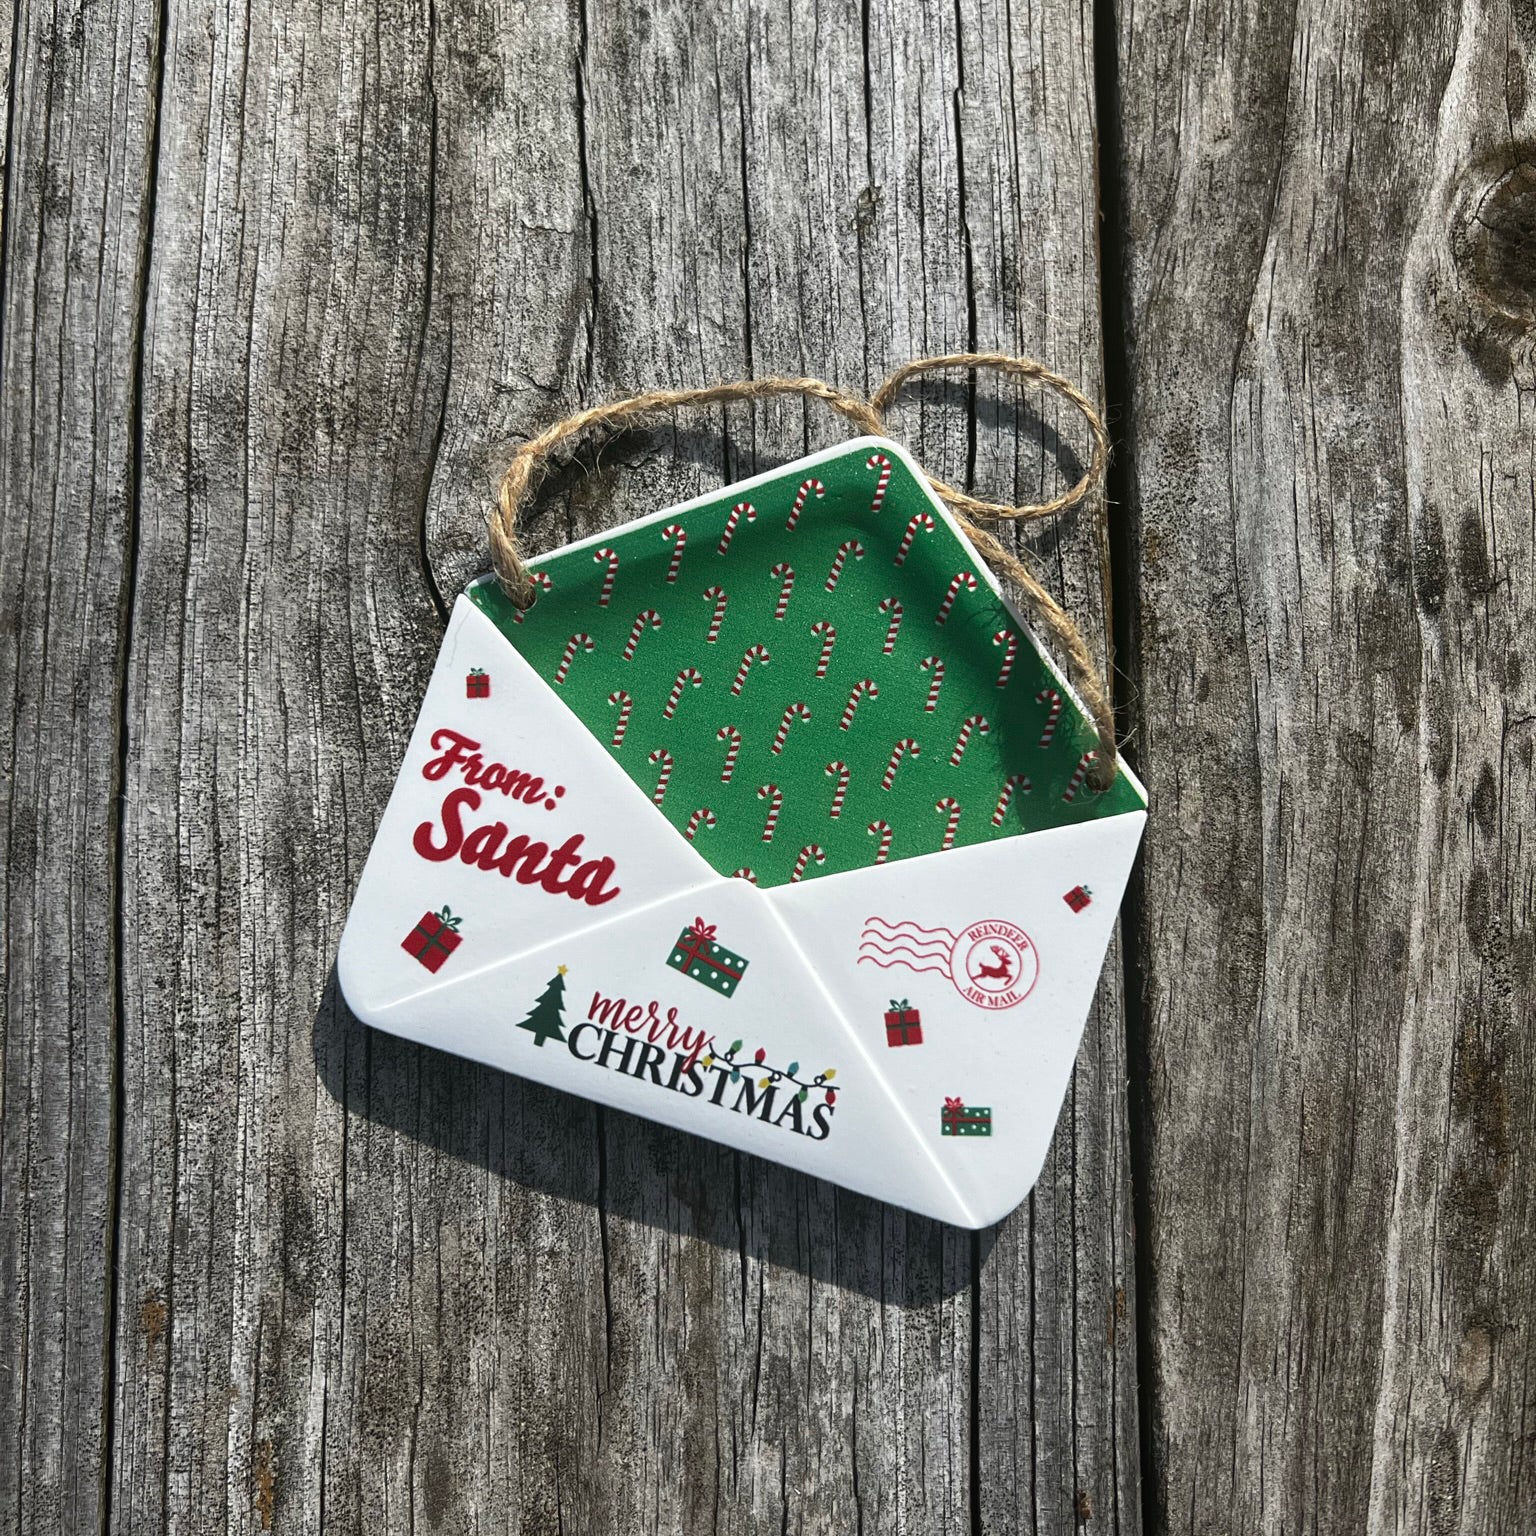 Christmas Collection (Note From Santa - Personalized) Green Candy Cane Envelope Resin Ornament with Letter